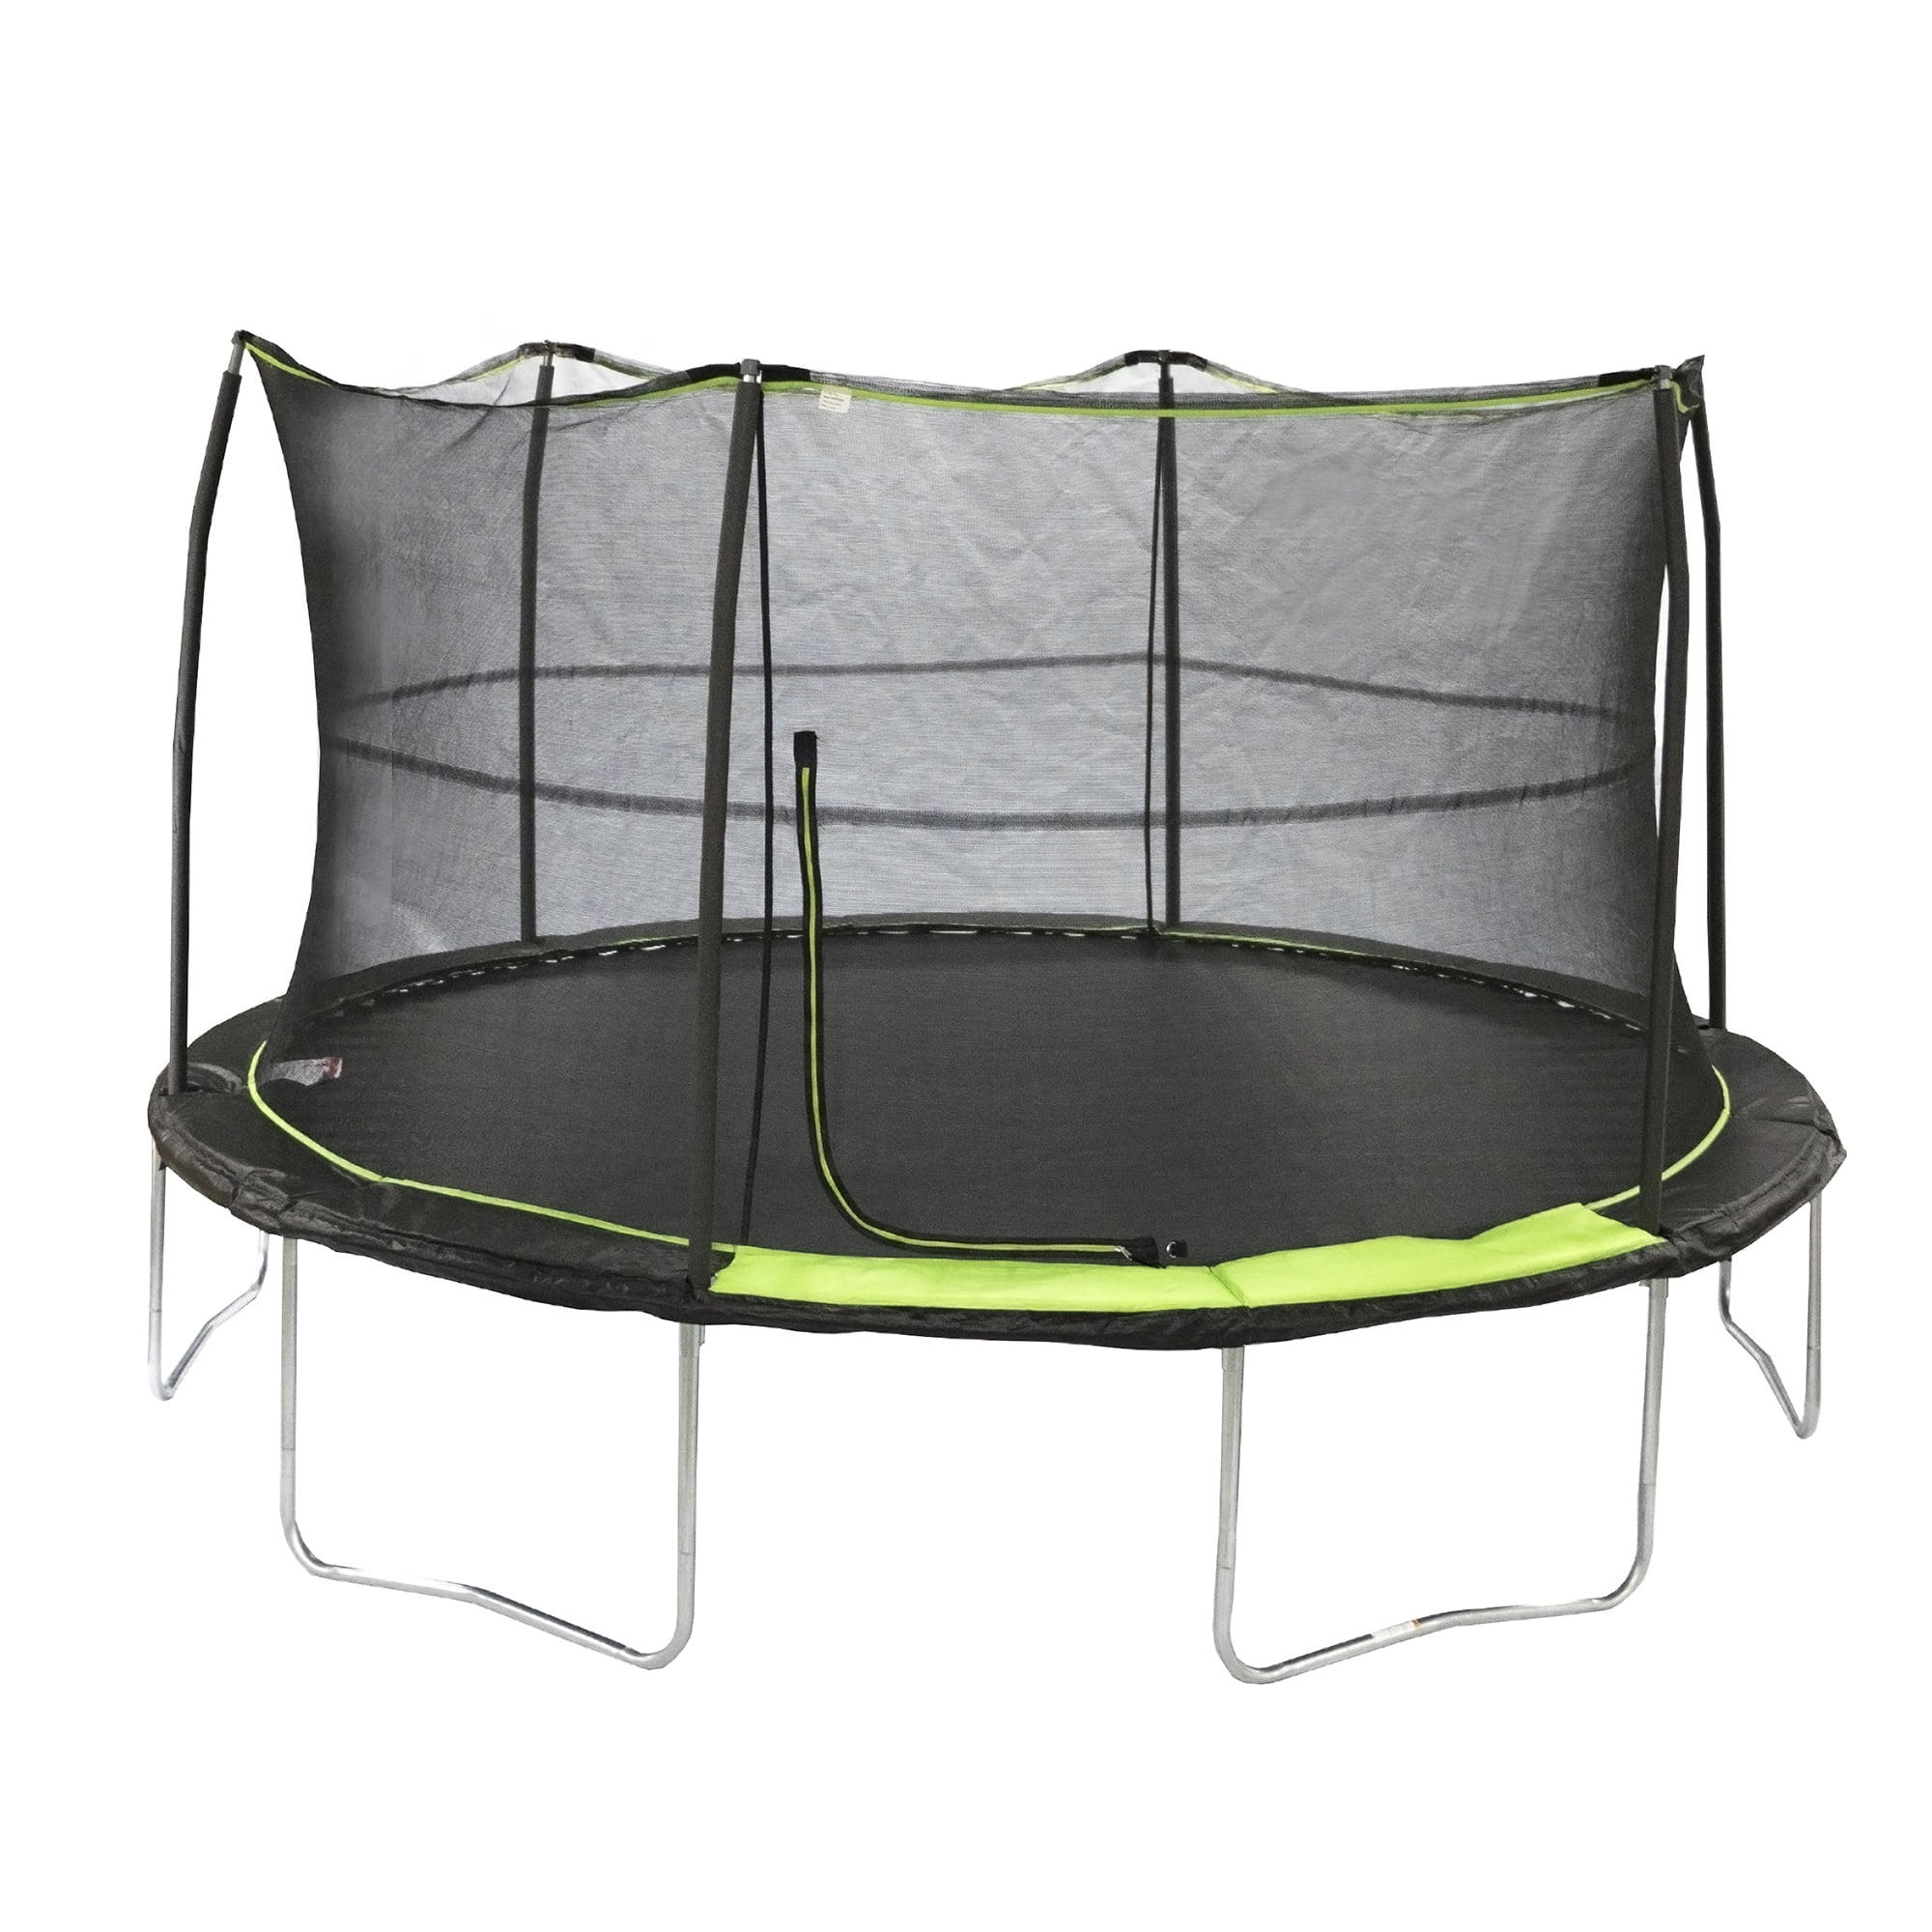 The JumpKing JumpPOD 14 ft Trampoline on a white backdrop.